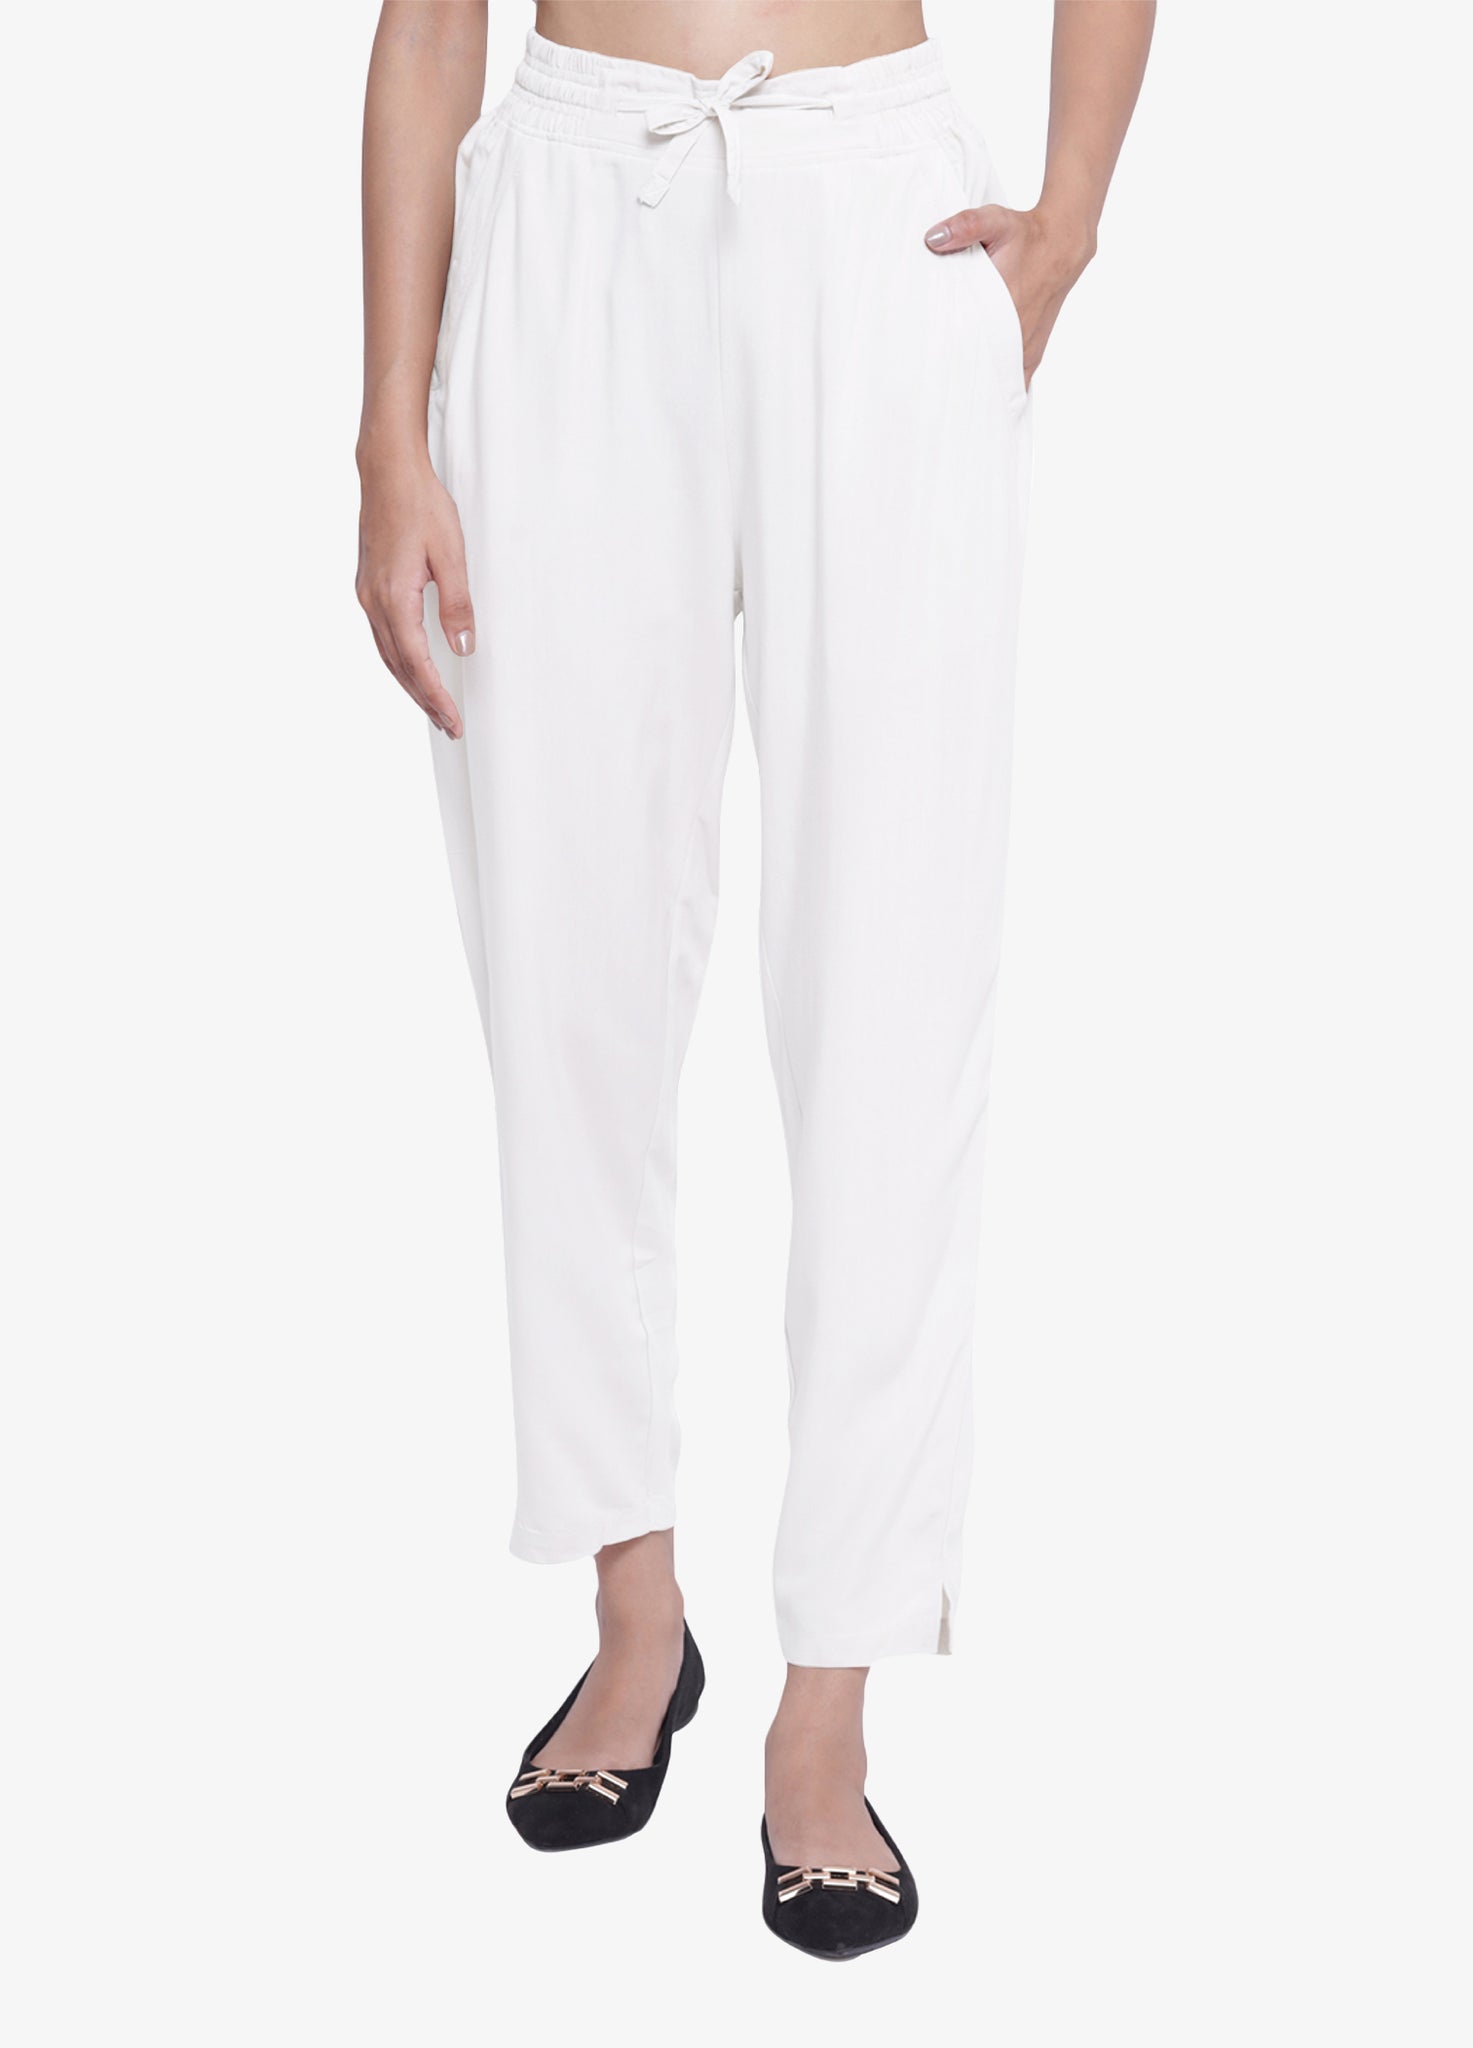 Stylish womens Trousers Cigarette Pant for women White color